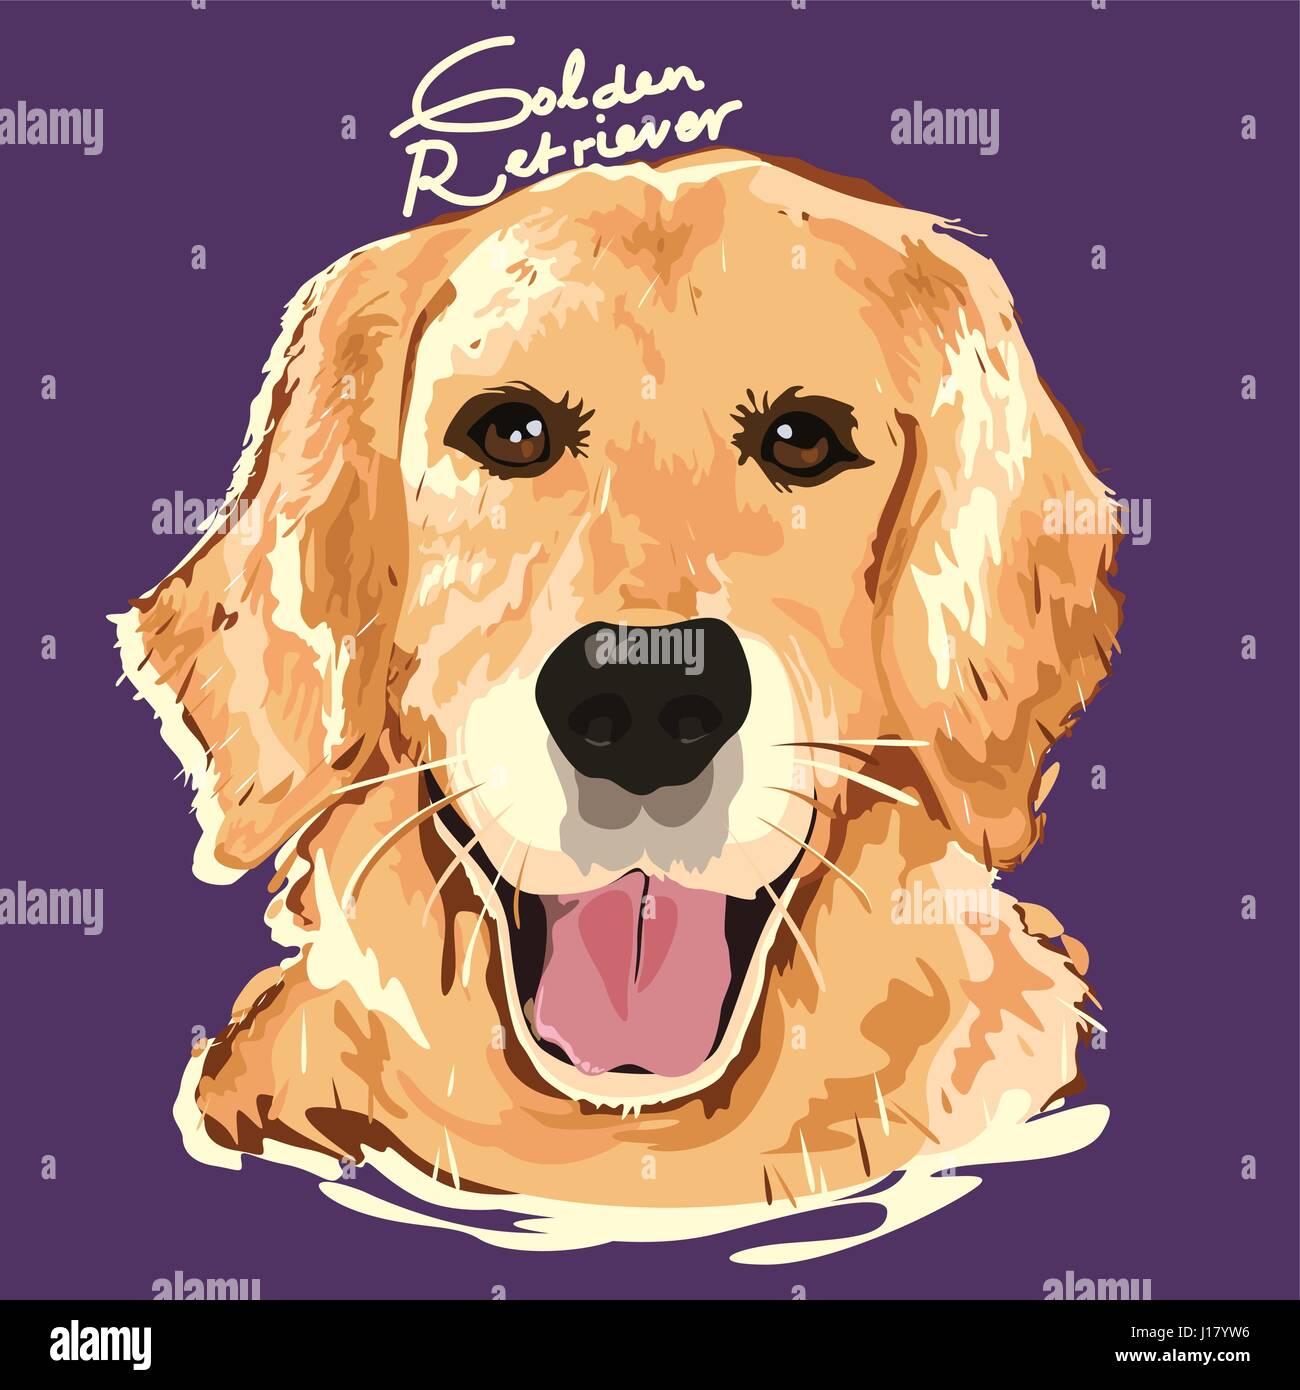 A vector illustration of Golden Retriever Painting Poster Stock Vector